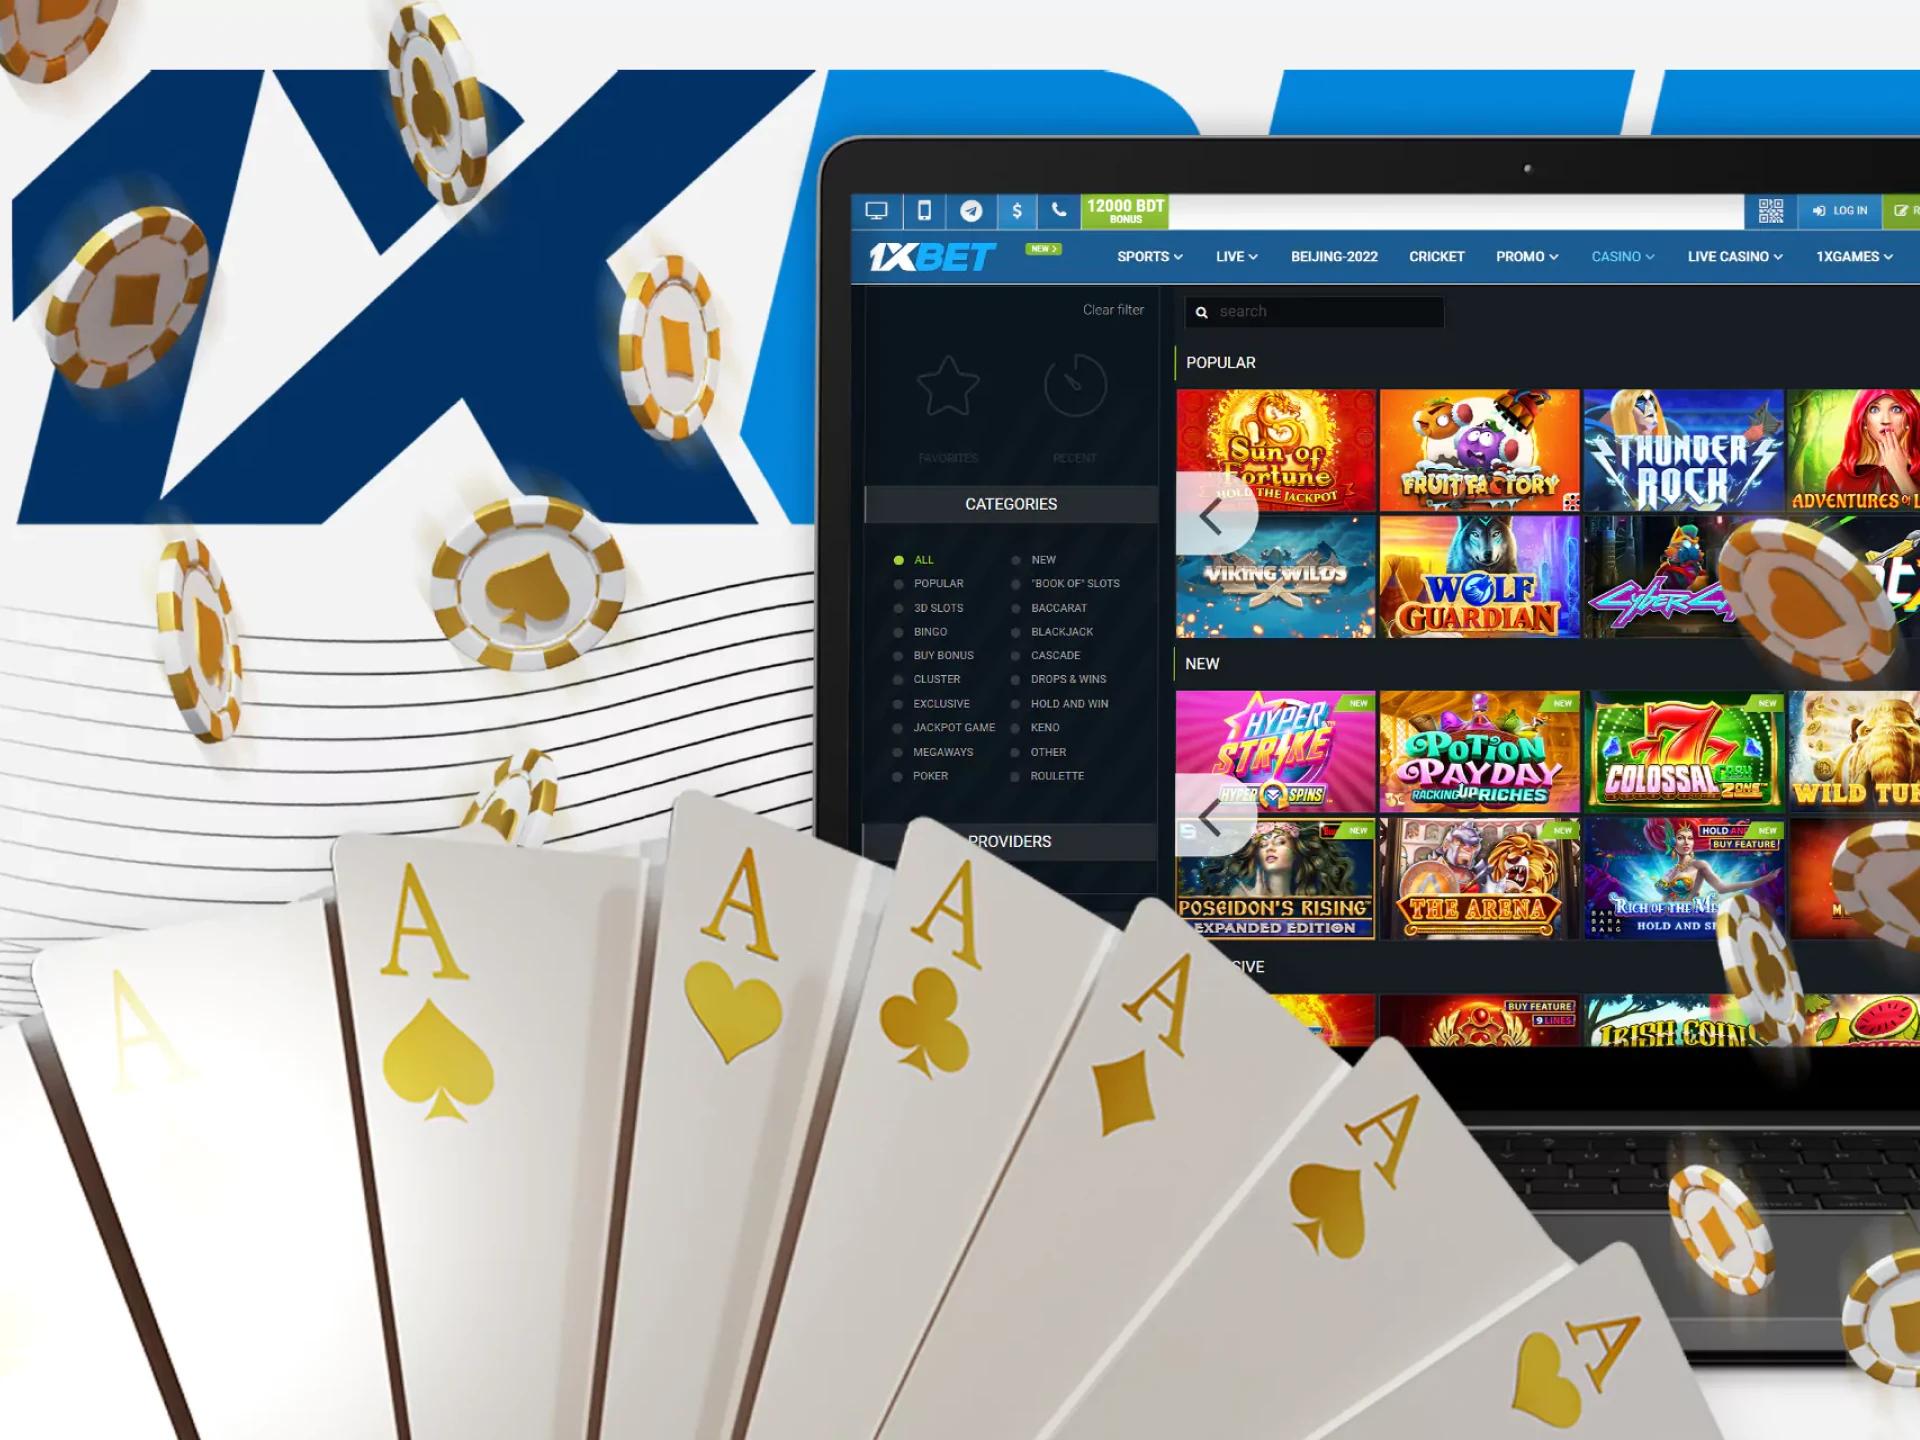 Only registered users can enjoy the 1xBet Casino and Live Casino.